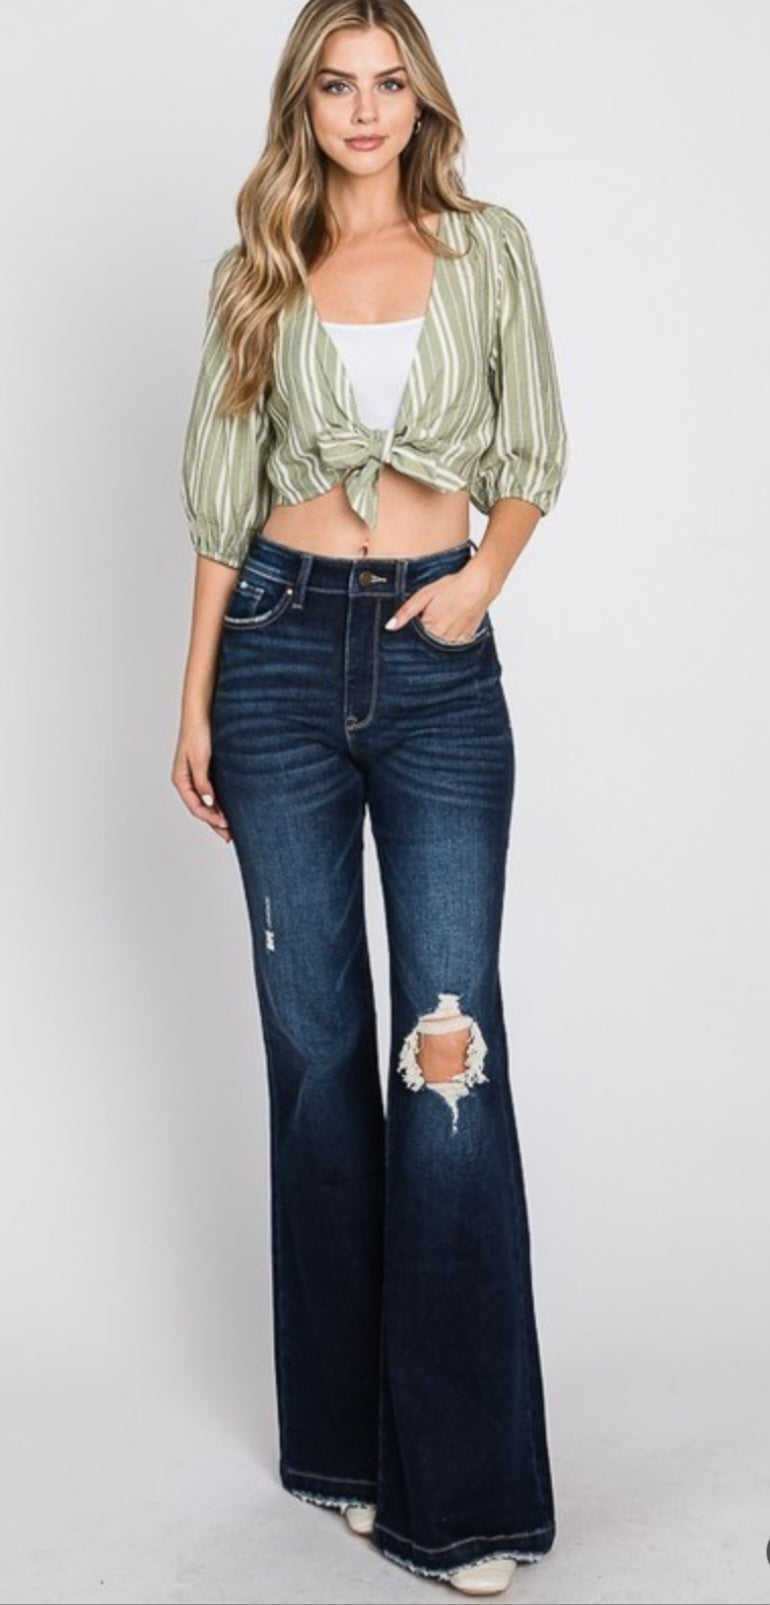 I Love The 70s Flare Jeans